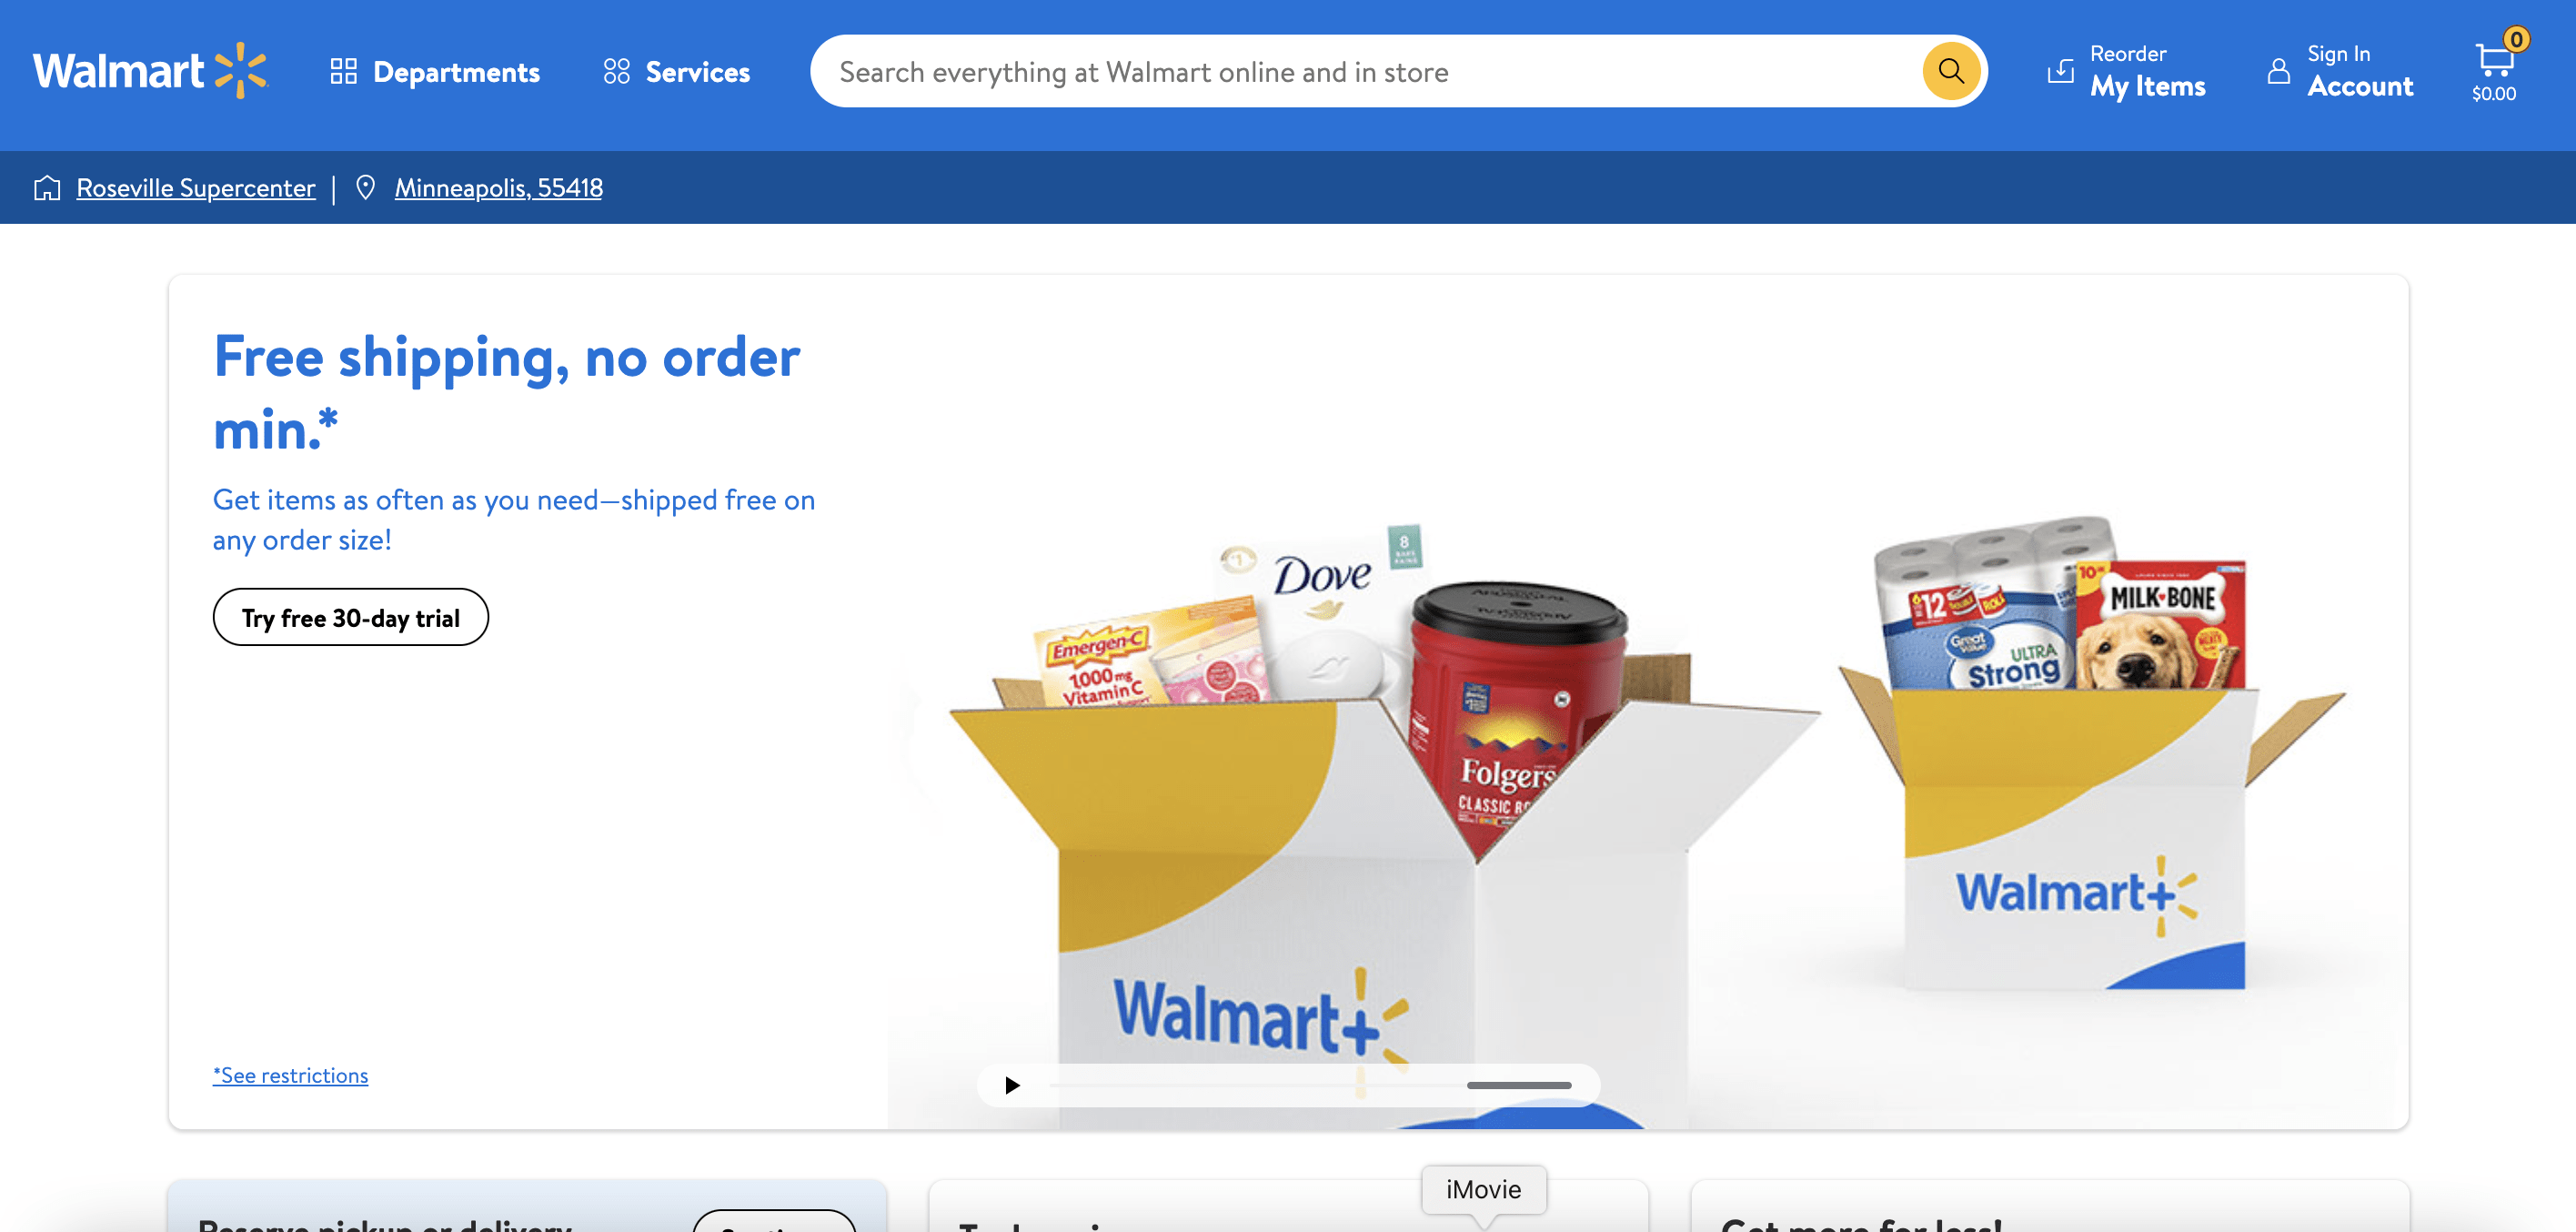 Screenshot of Walmart's website homepage used as an example for a retail e-commerce site